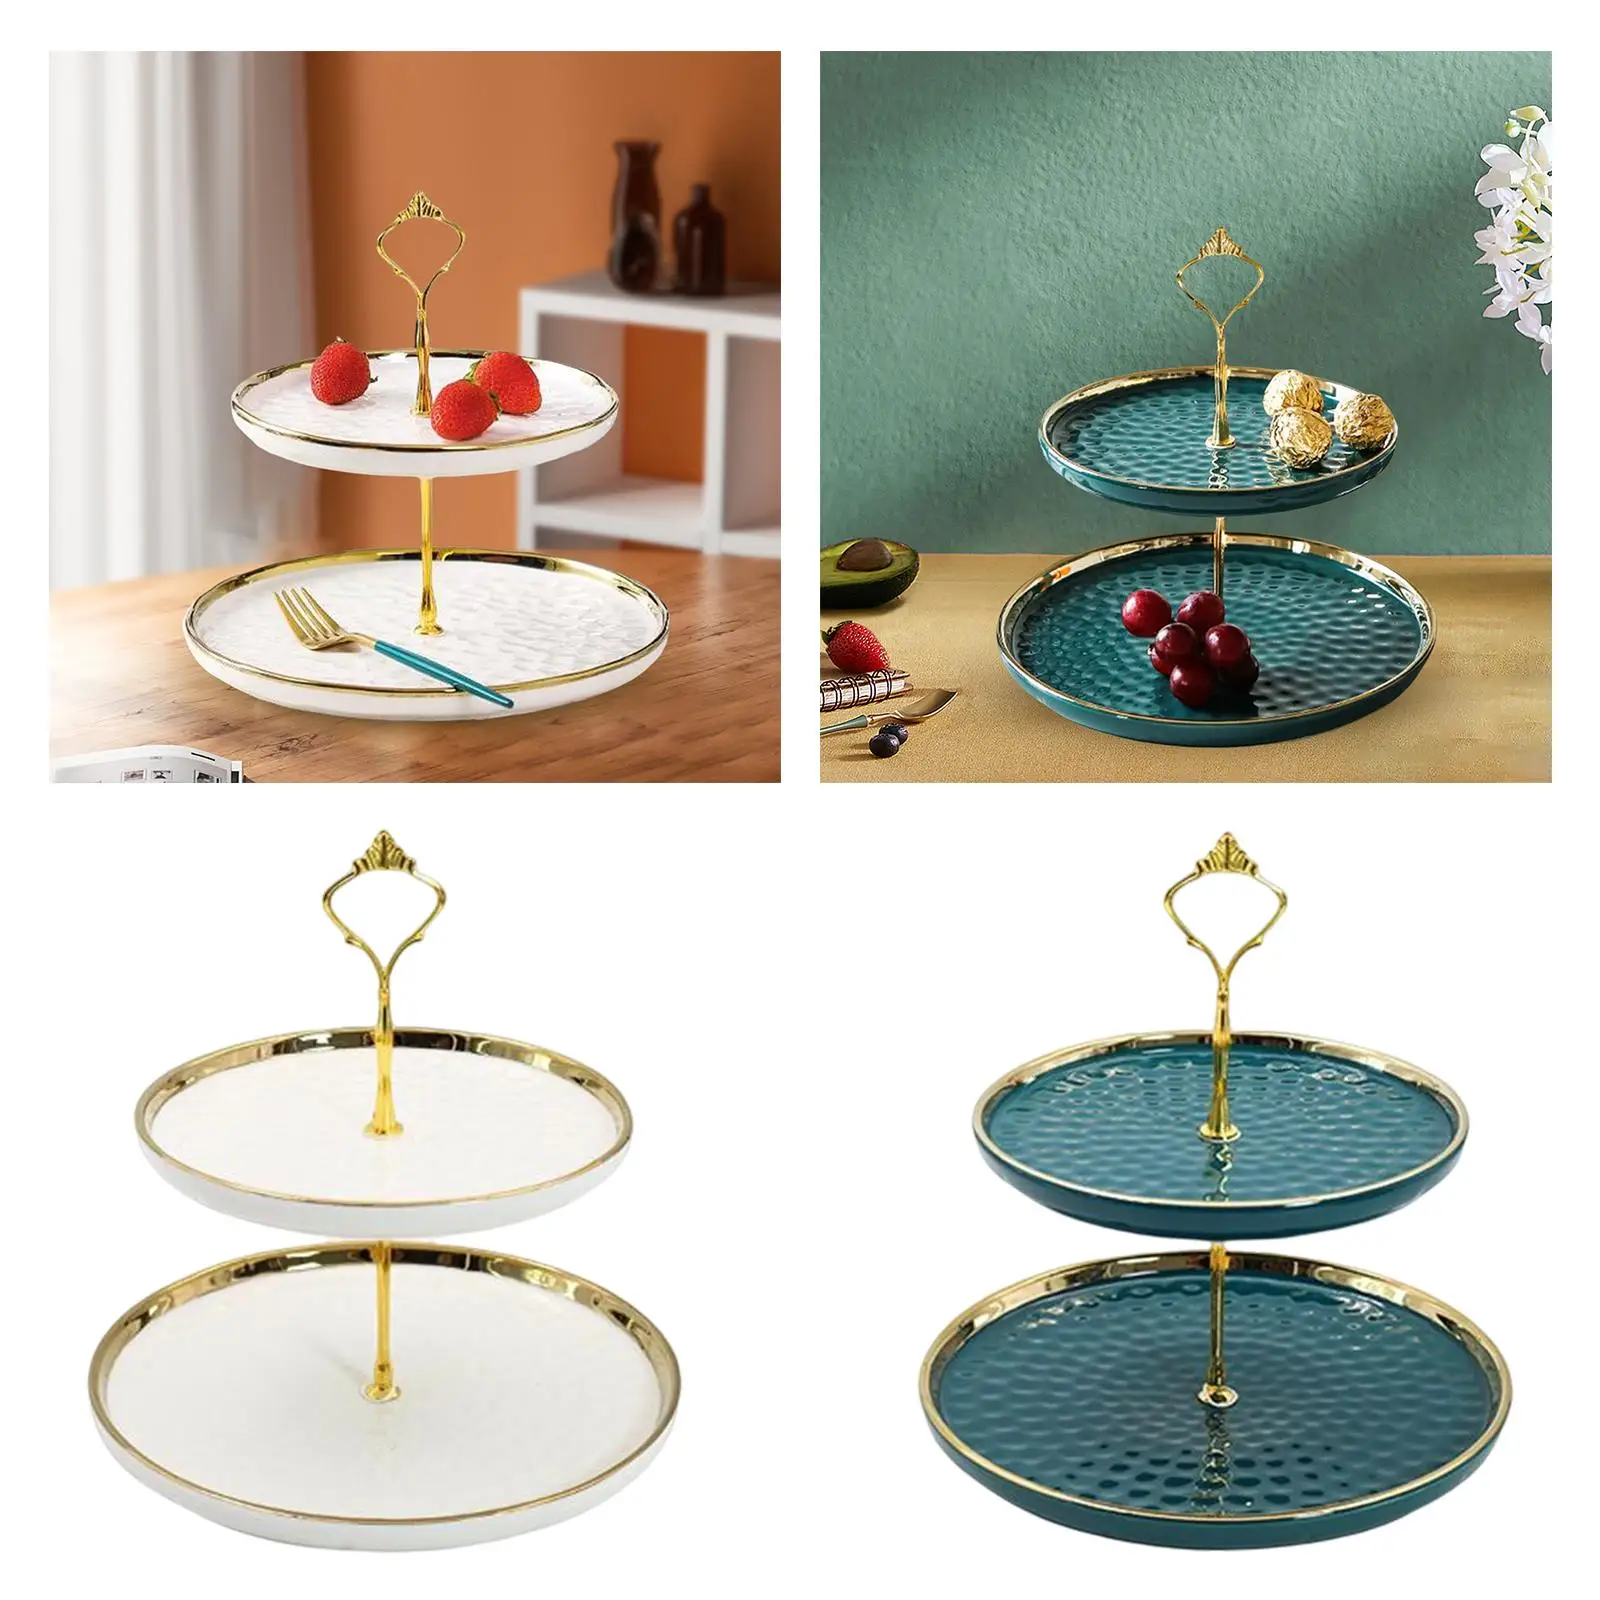 2 Layer Cupcake Stand Elegant Dessert Cake Stand Serving Tray Display Tower for Fruit Cakes Birthday Wedding Living Room